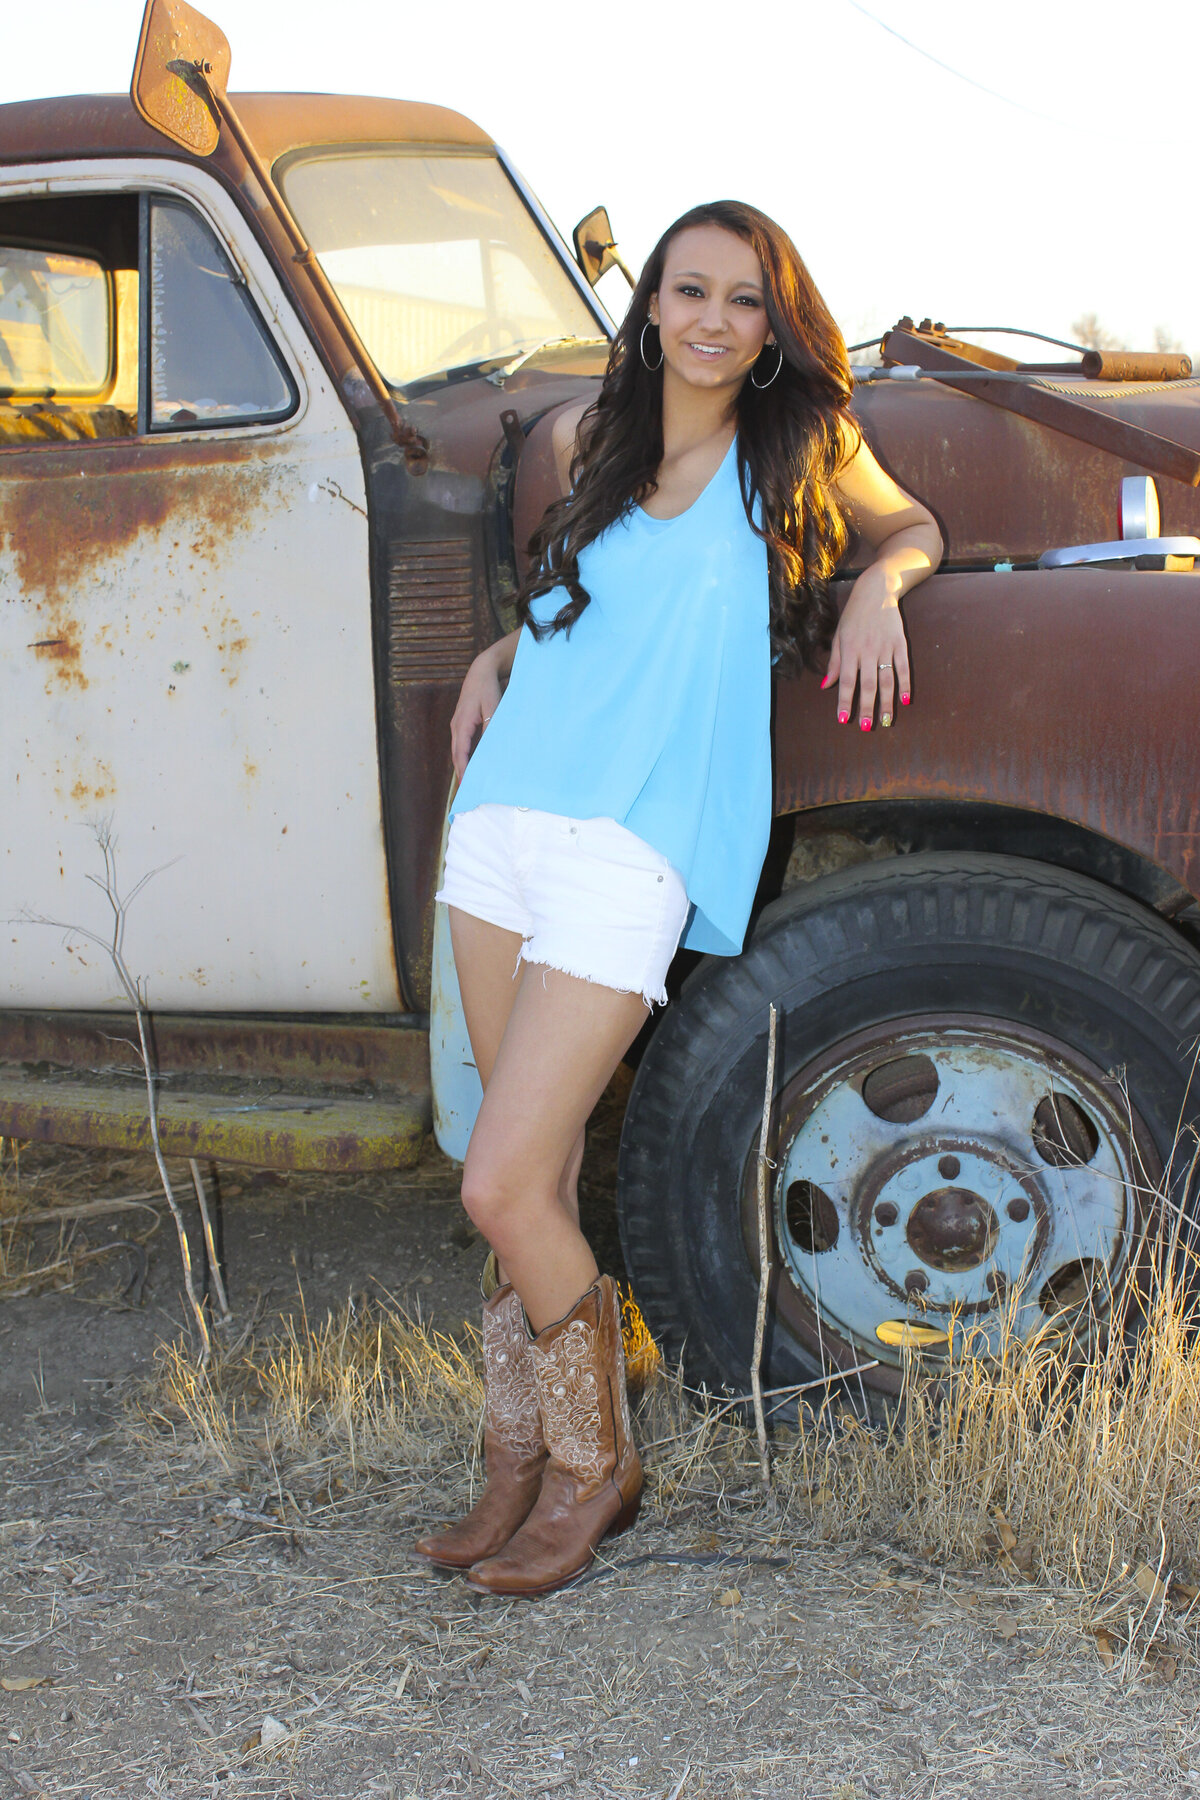 Lady leaning on old rusted truck with glowing light of sunset beaming down golden light